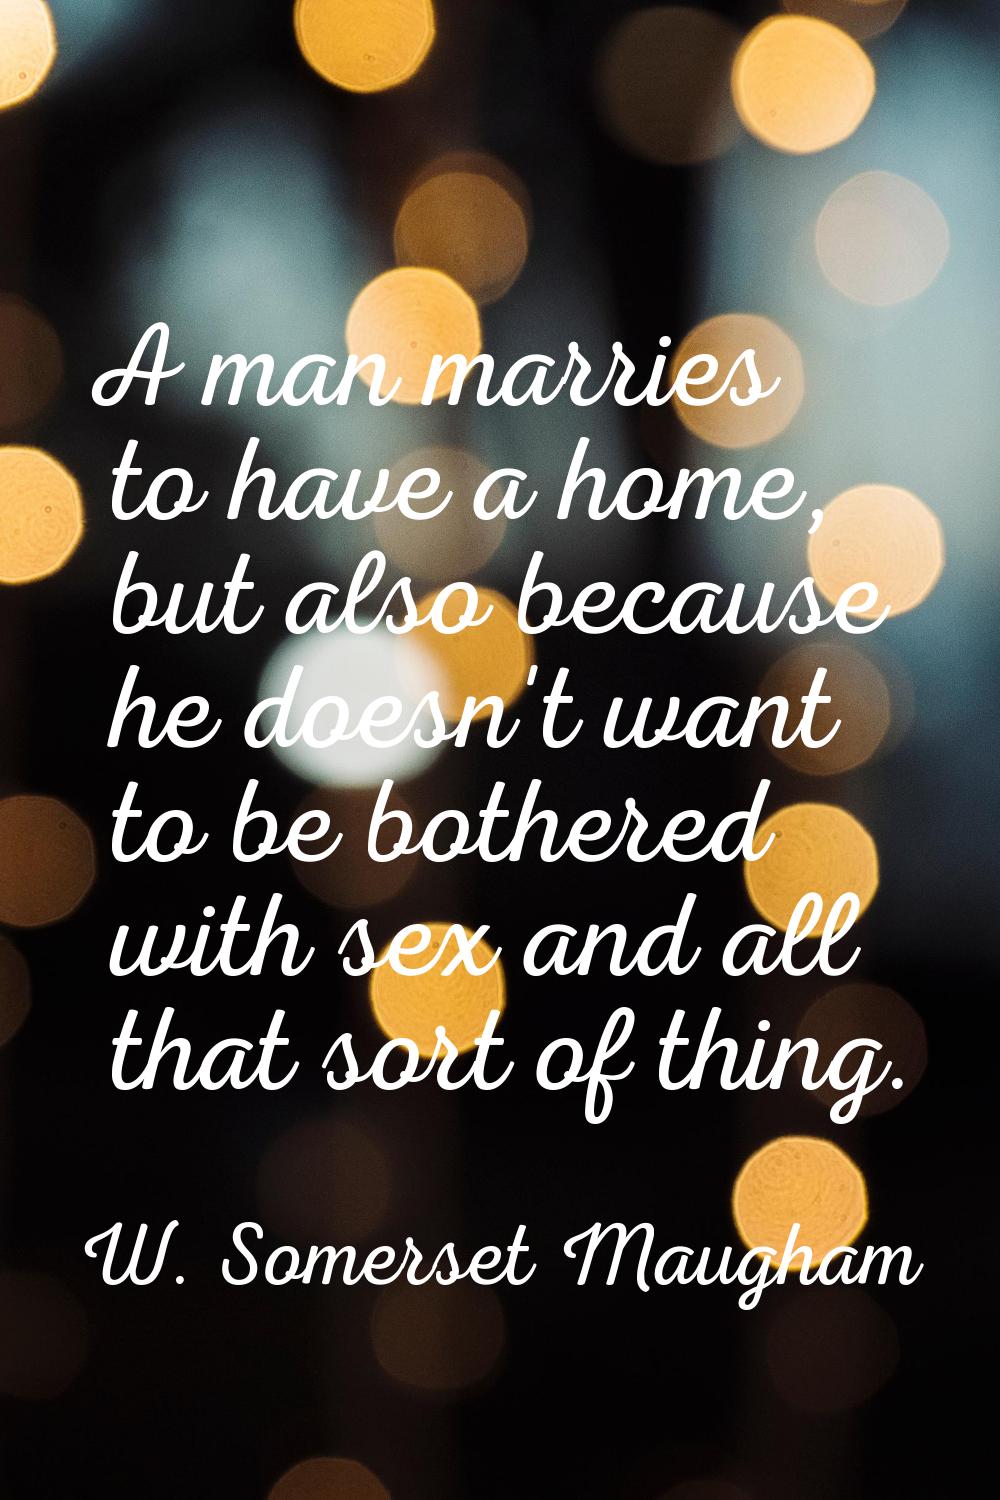 A man marries to have a home, but also because he doesn't want to be bothered with sex and all that